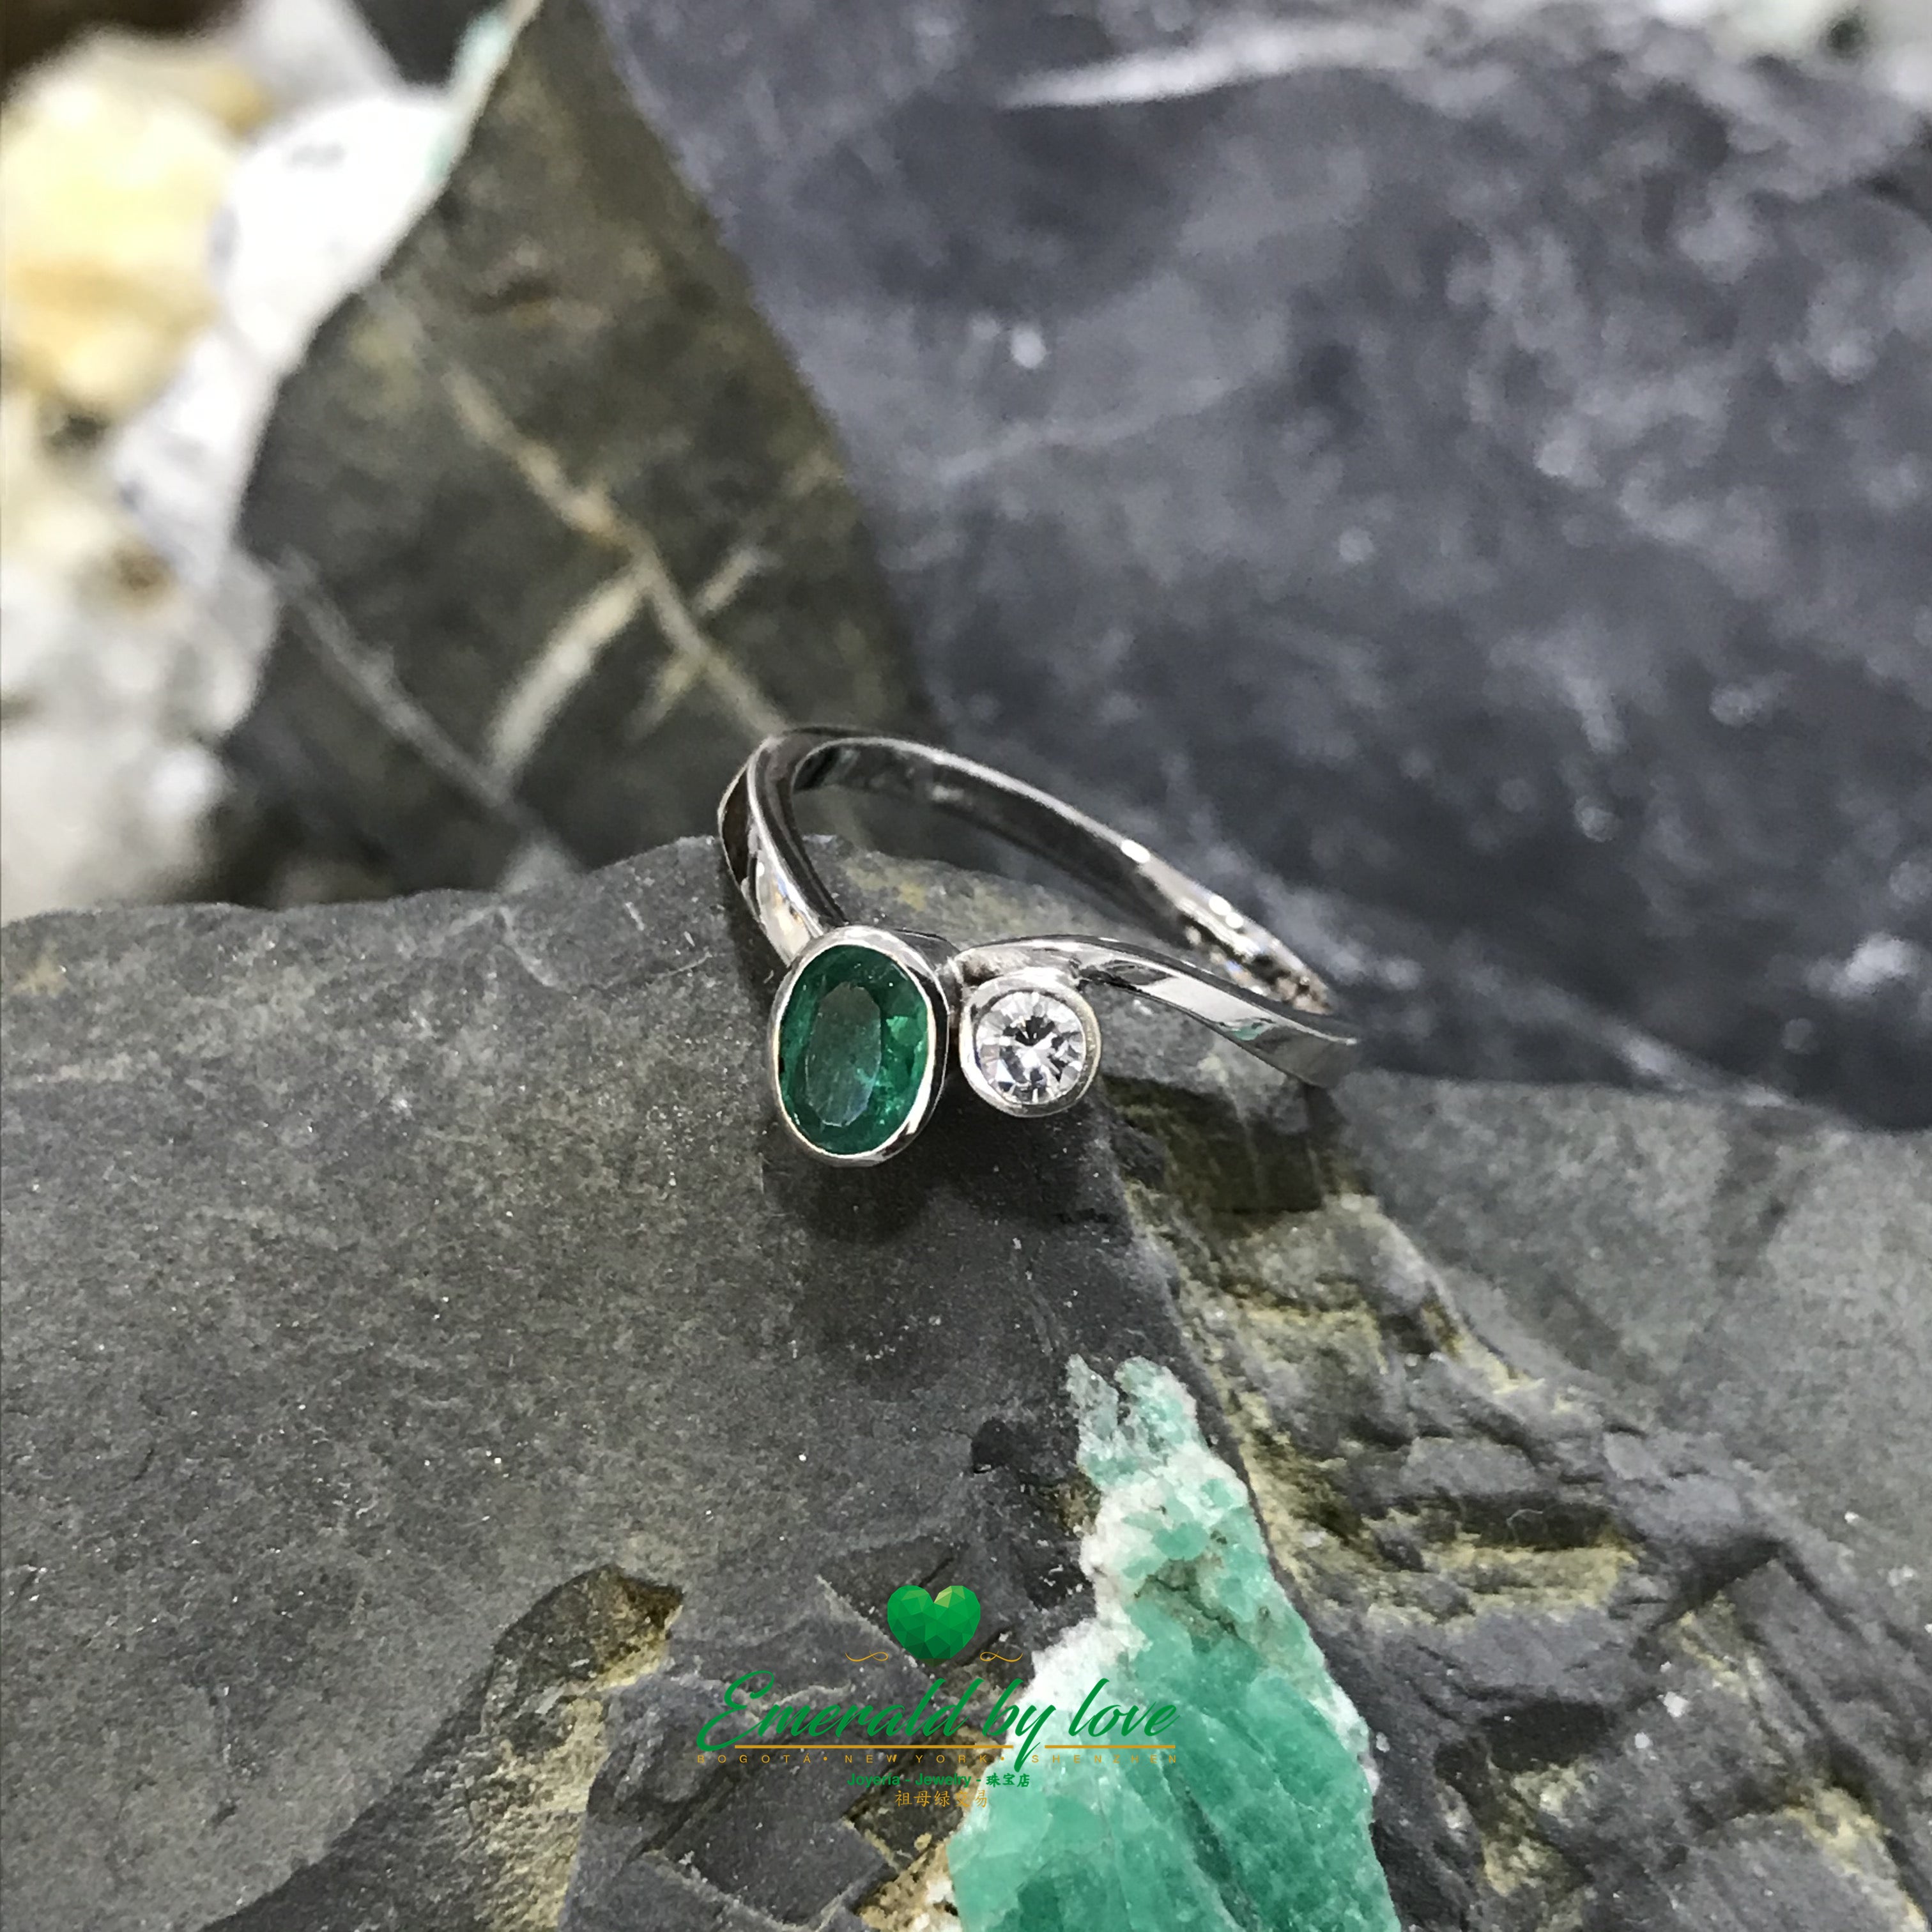 Delicate White Gold Ring with Colombian Oval Emerald and Diamond